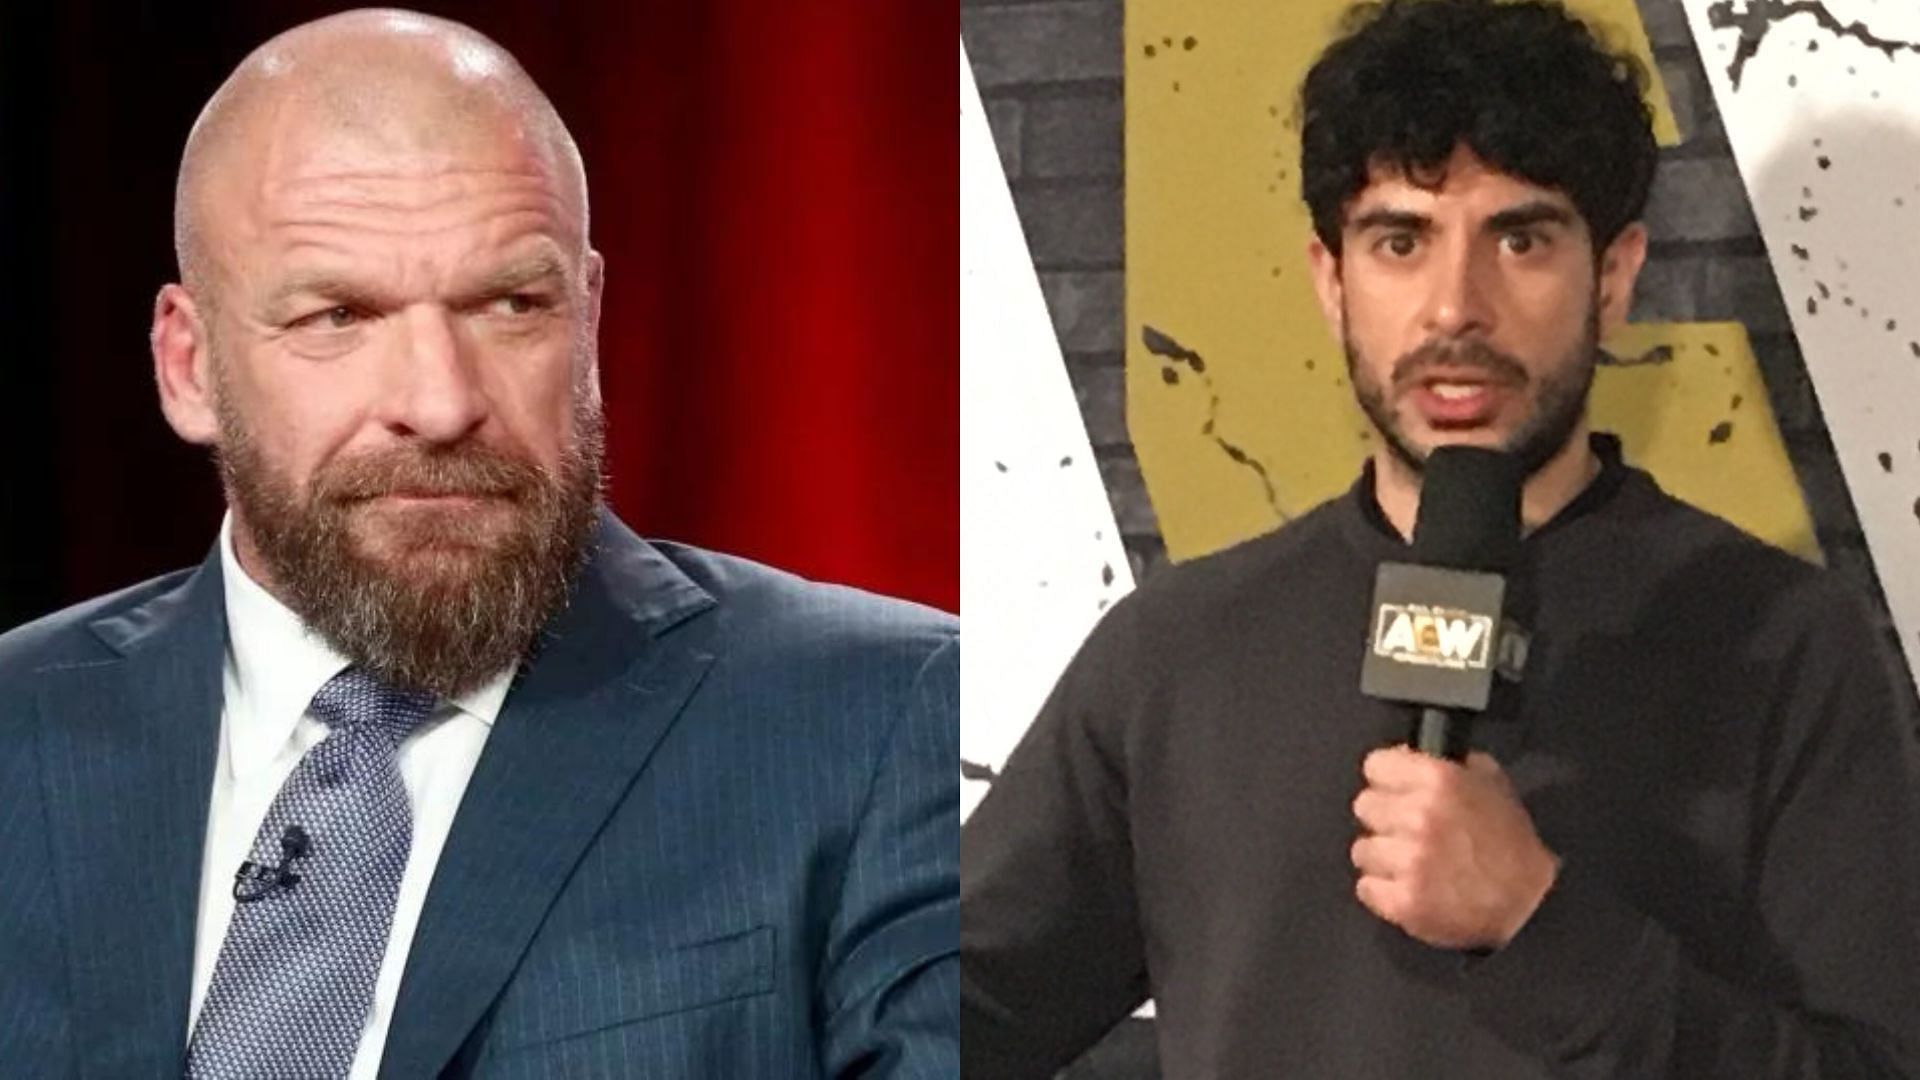 Could Triple H and Tony Khan work together?